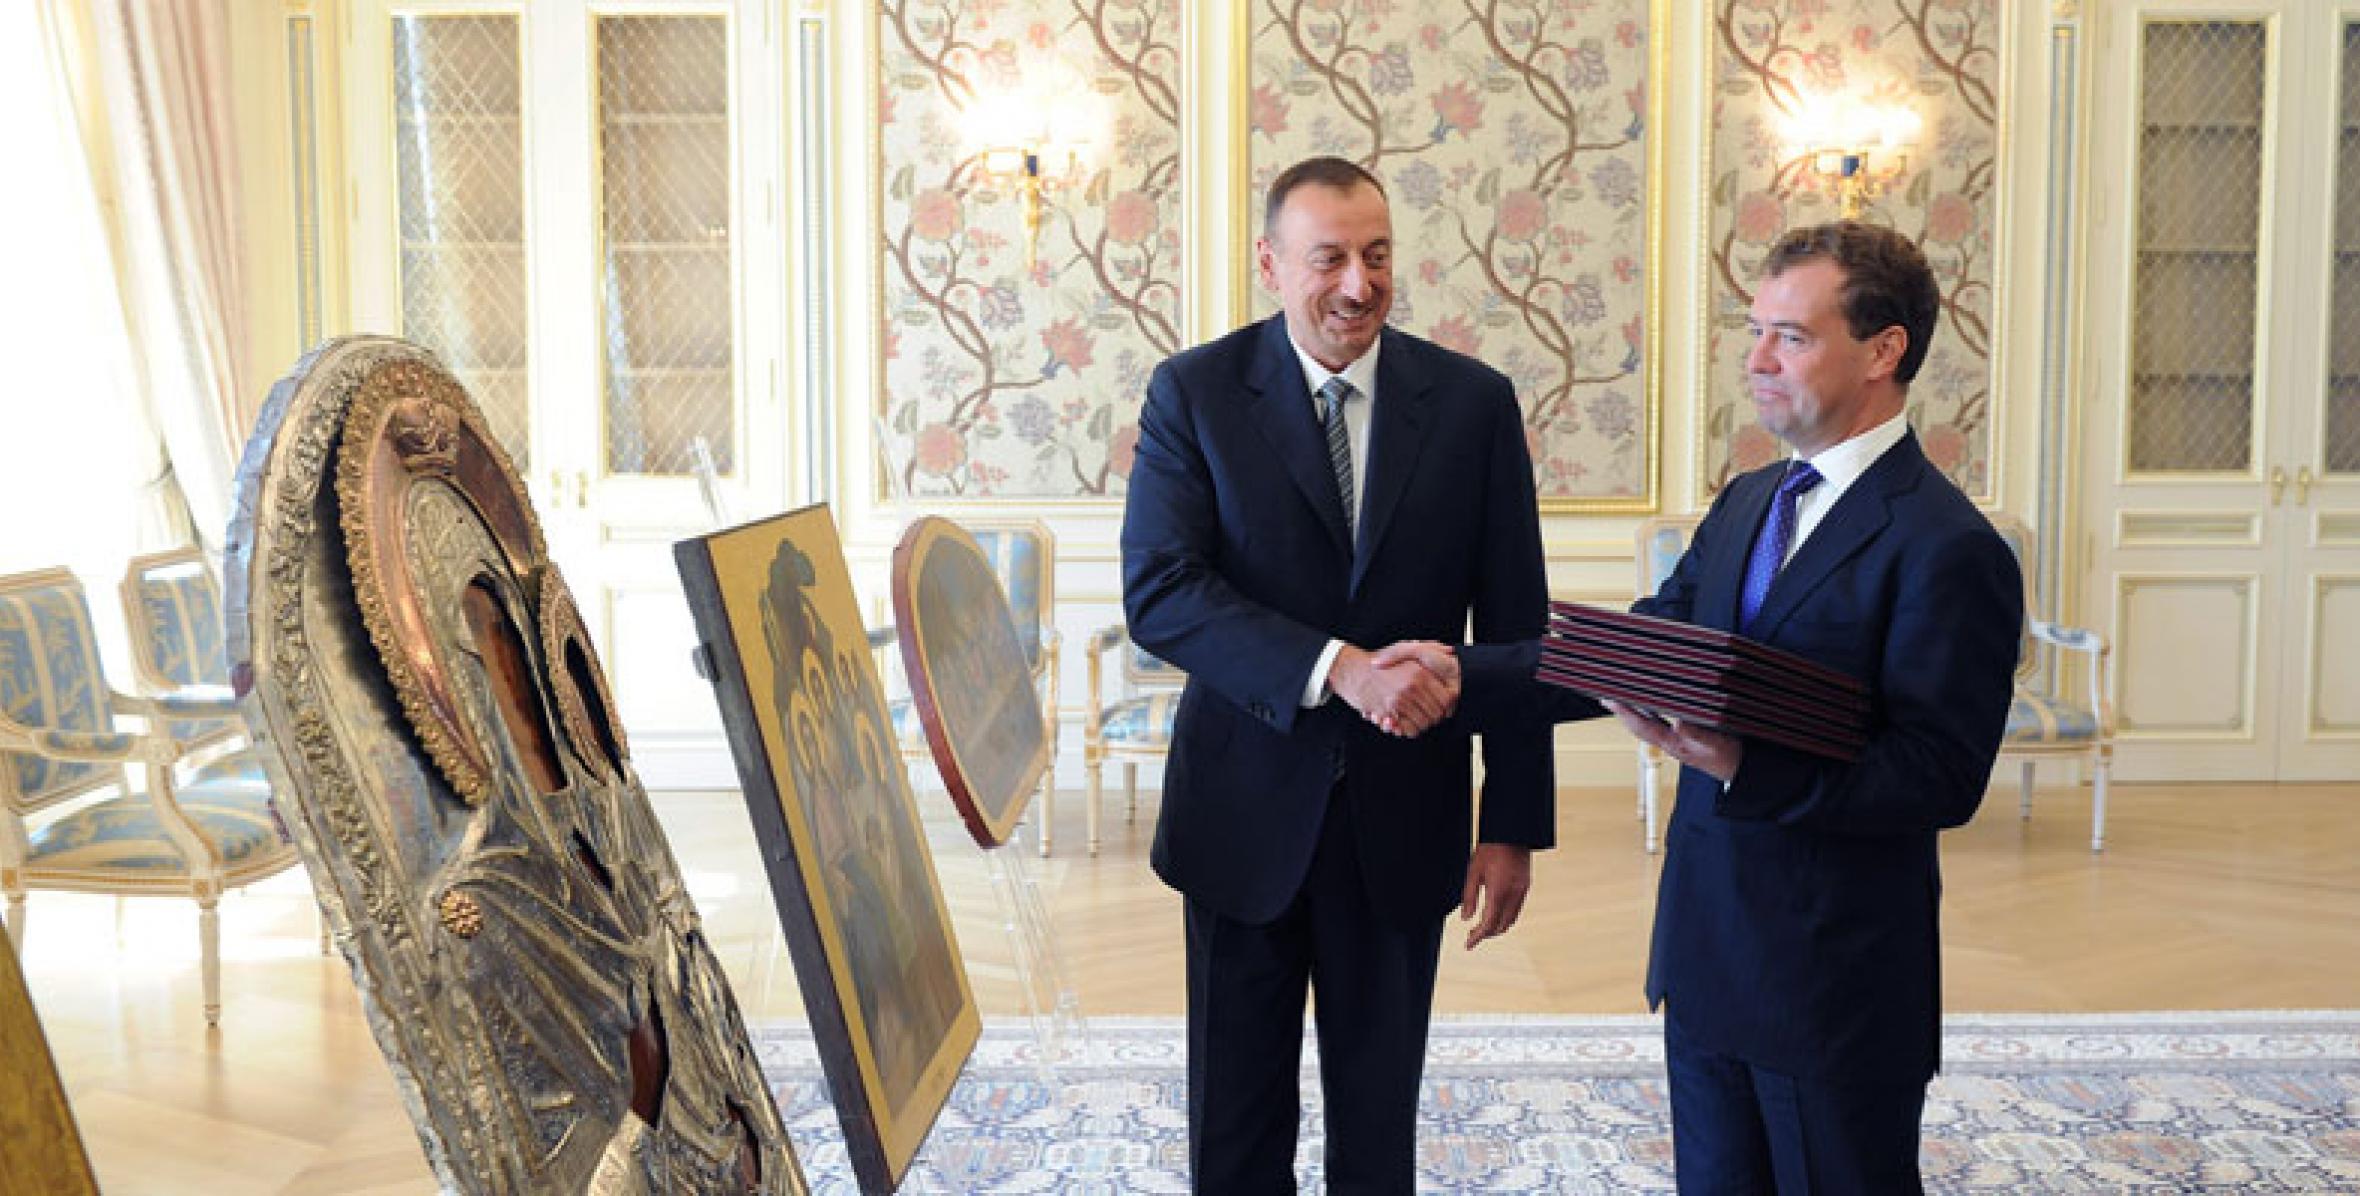 Ilham Aliyev handed over to Dmitry Medvedev the icons and art pieces brought to Azerbaijan illegally from Russia